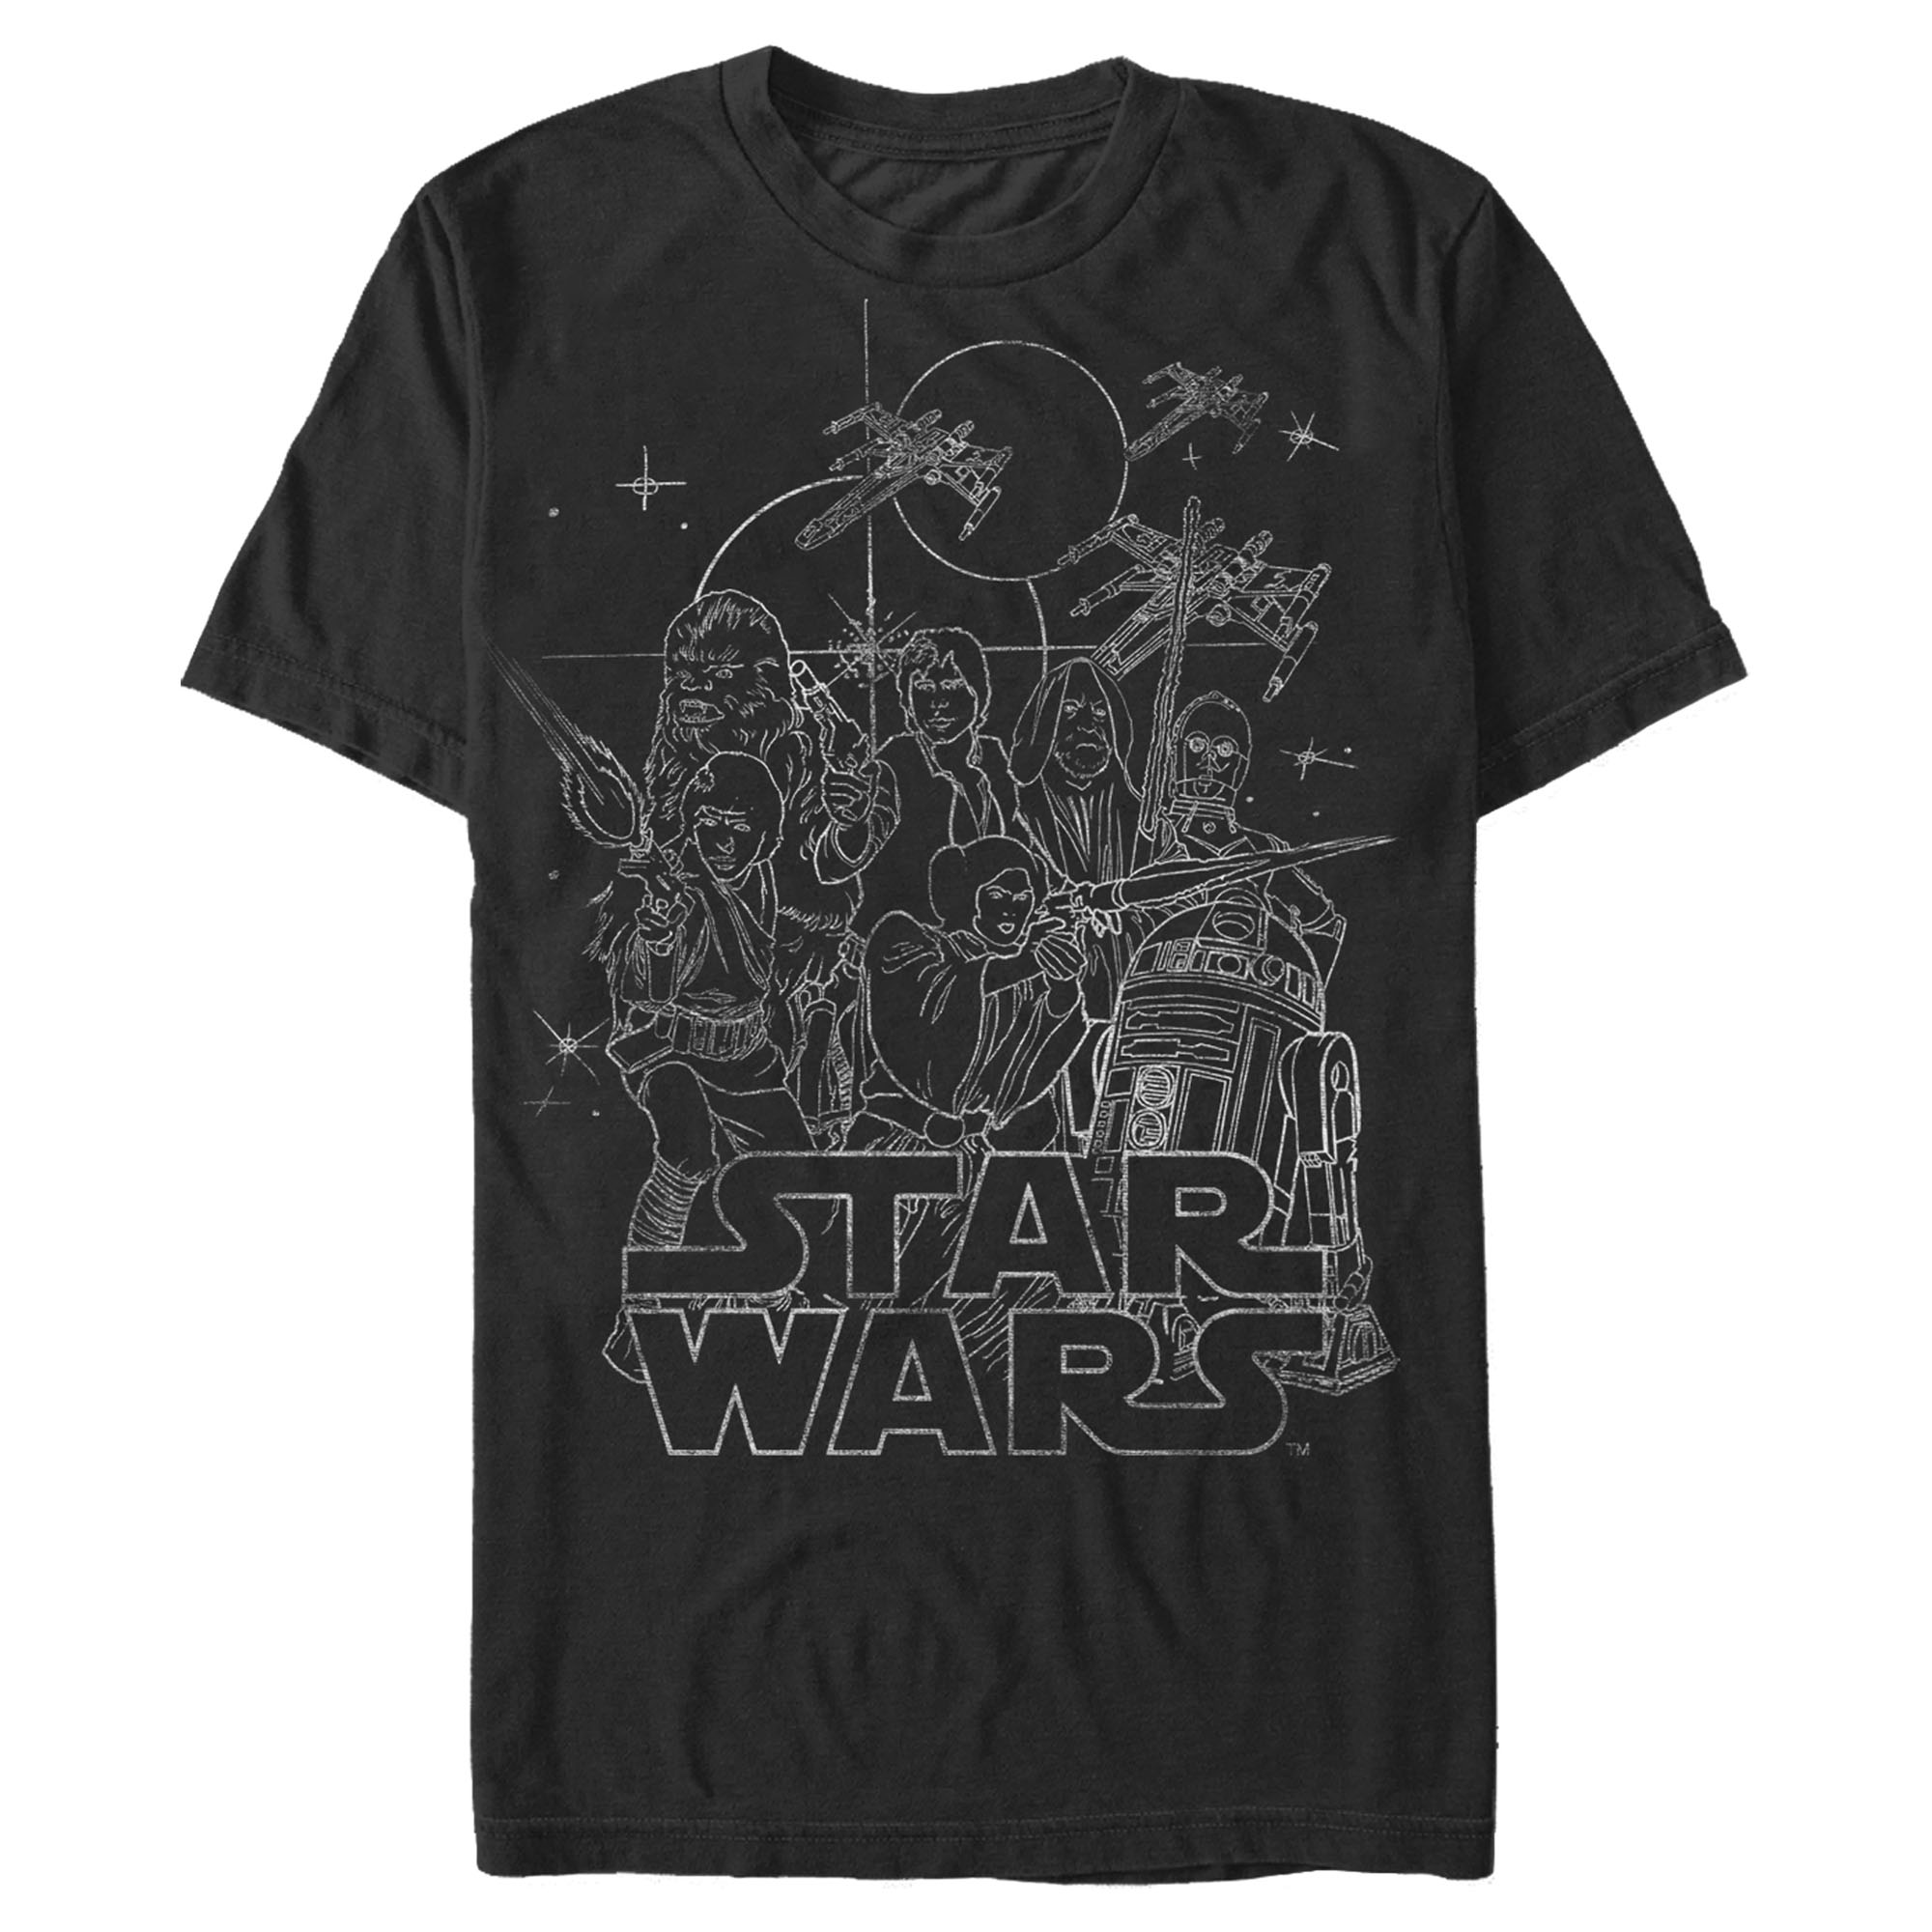 Men's Star Wars Character Outline  Graphic Tee Black 5X Large - image 1 of 4